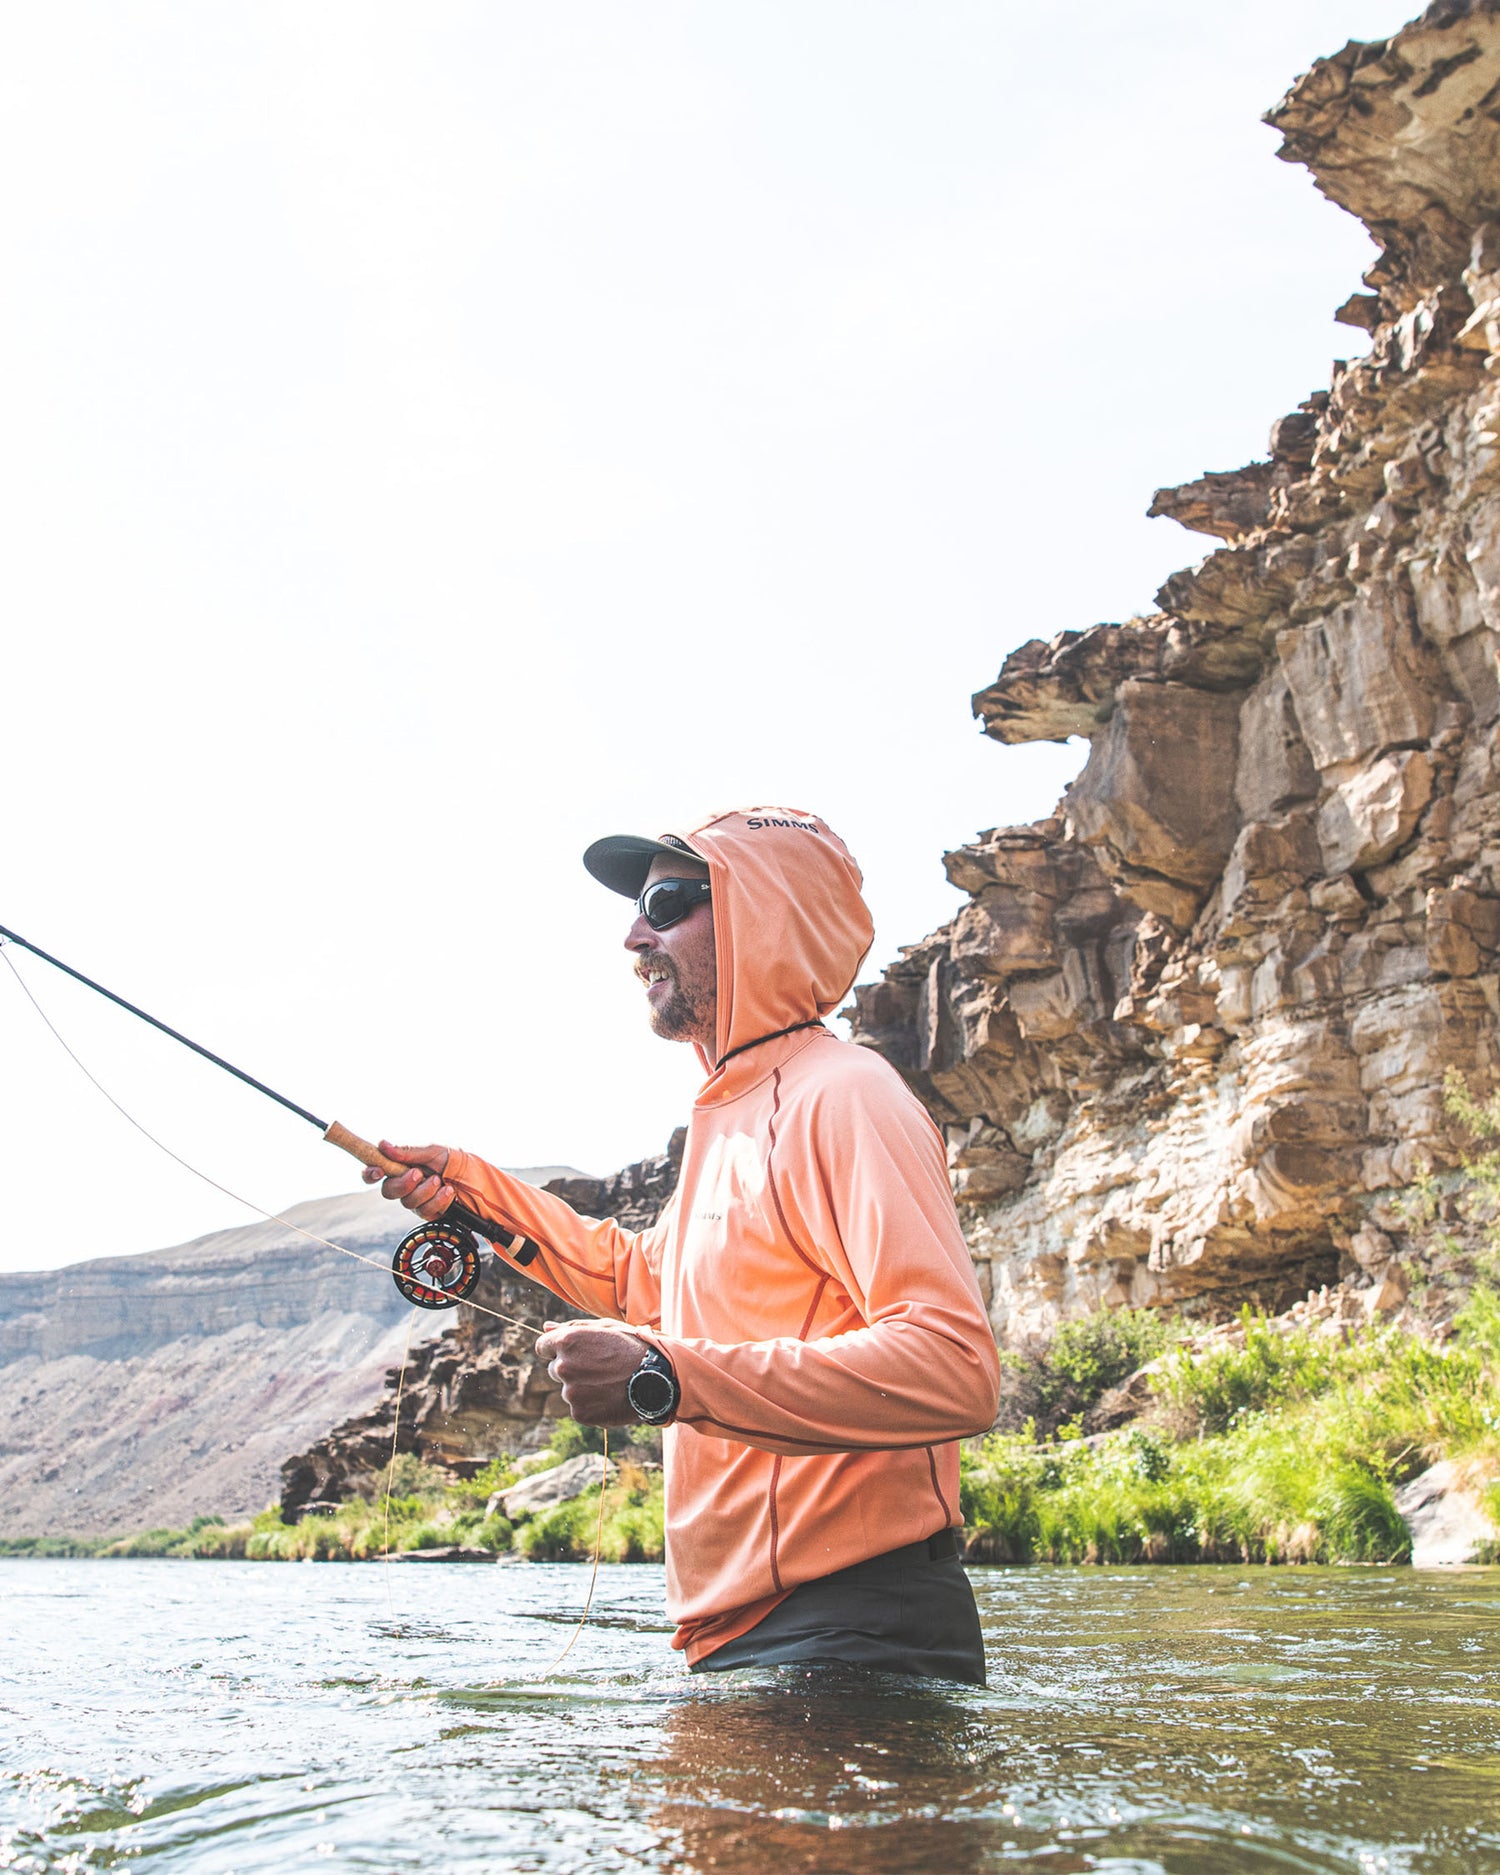 Catch More Fish All Spring And Summer With These Simms, 50% OFF